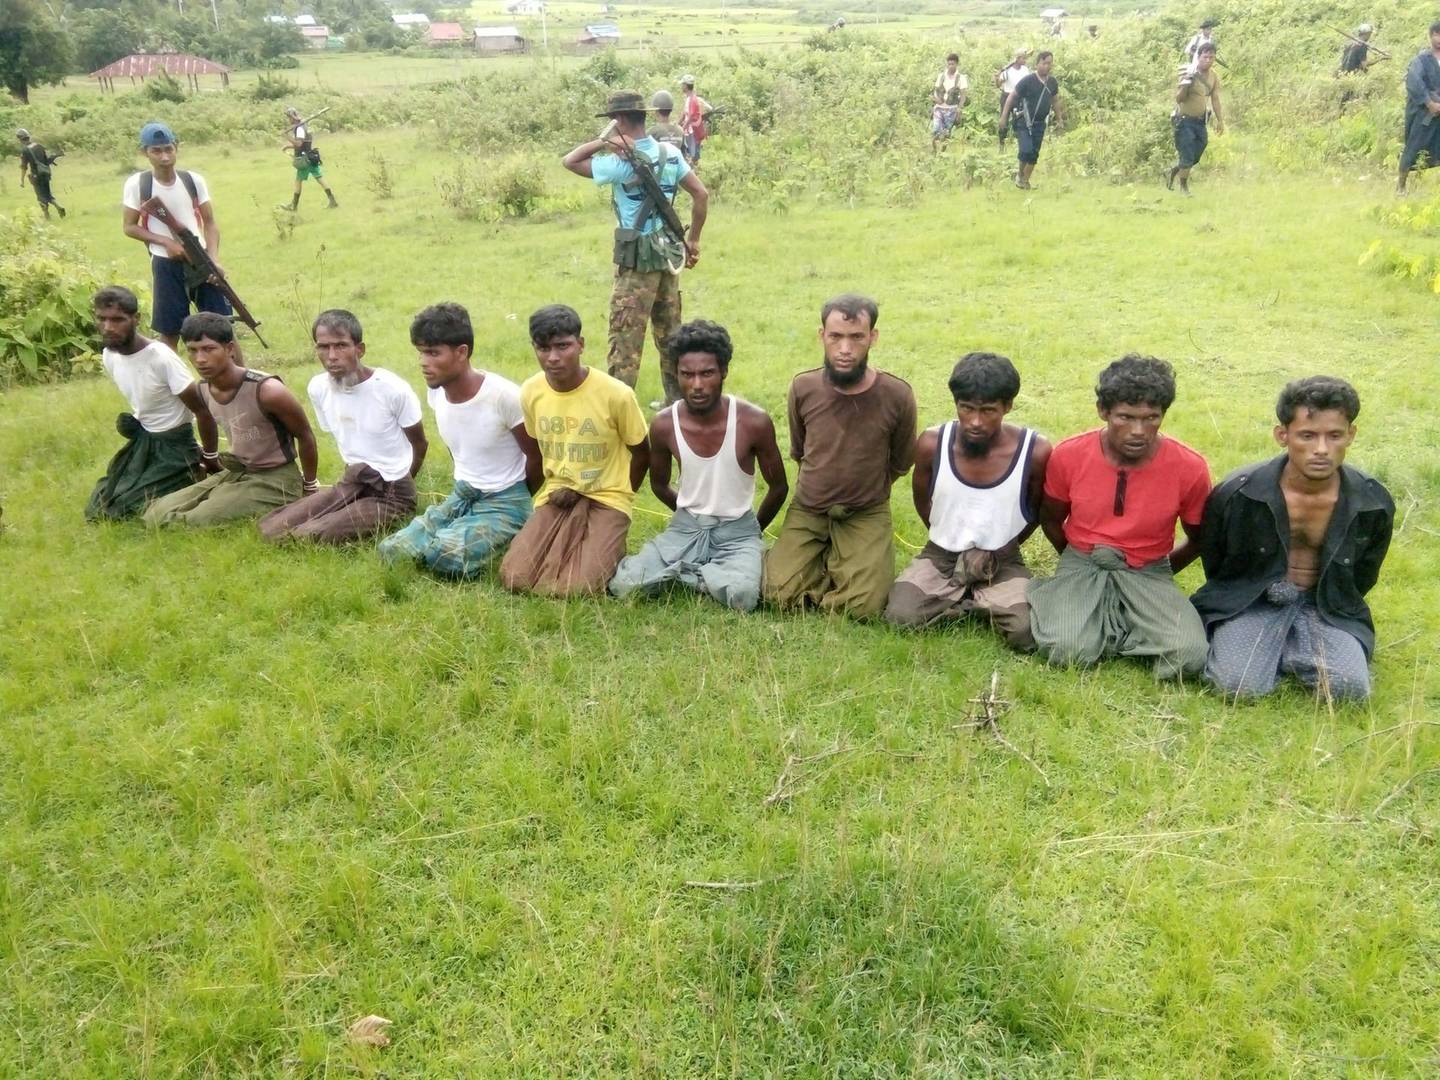 FILE PHOTO: Ten Rohingya Muslim men with their hands bound kneel as members of the Myanmar security forces stand guard in Inn Din village September 2, 2017. To match Special Report MYANMAR-JOURNALISTS/TRIAL    REUTERS/File Photo